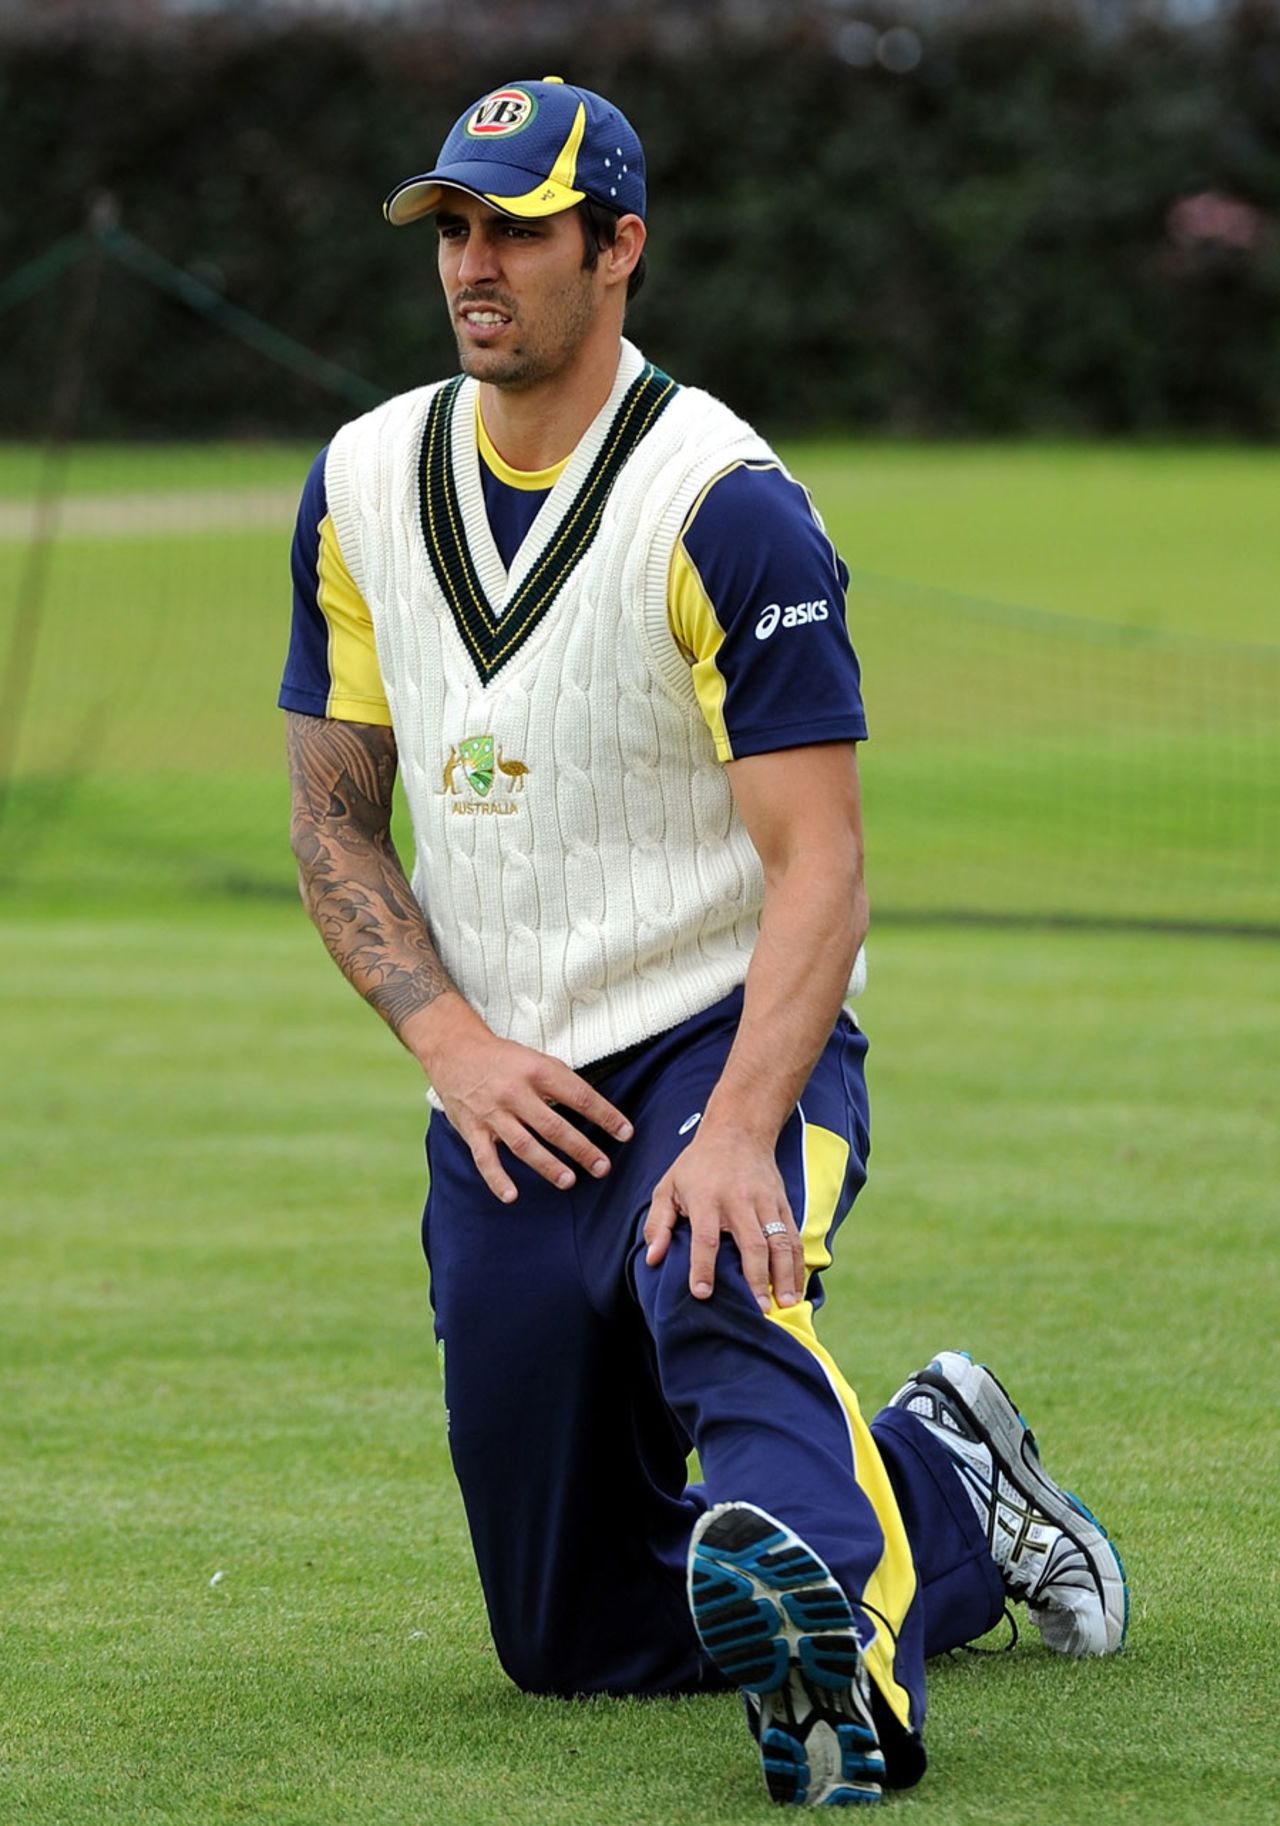 Mitchell Johnson stretches during nets, Old Trafford, August 6, 2012